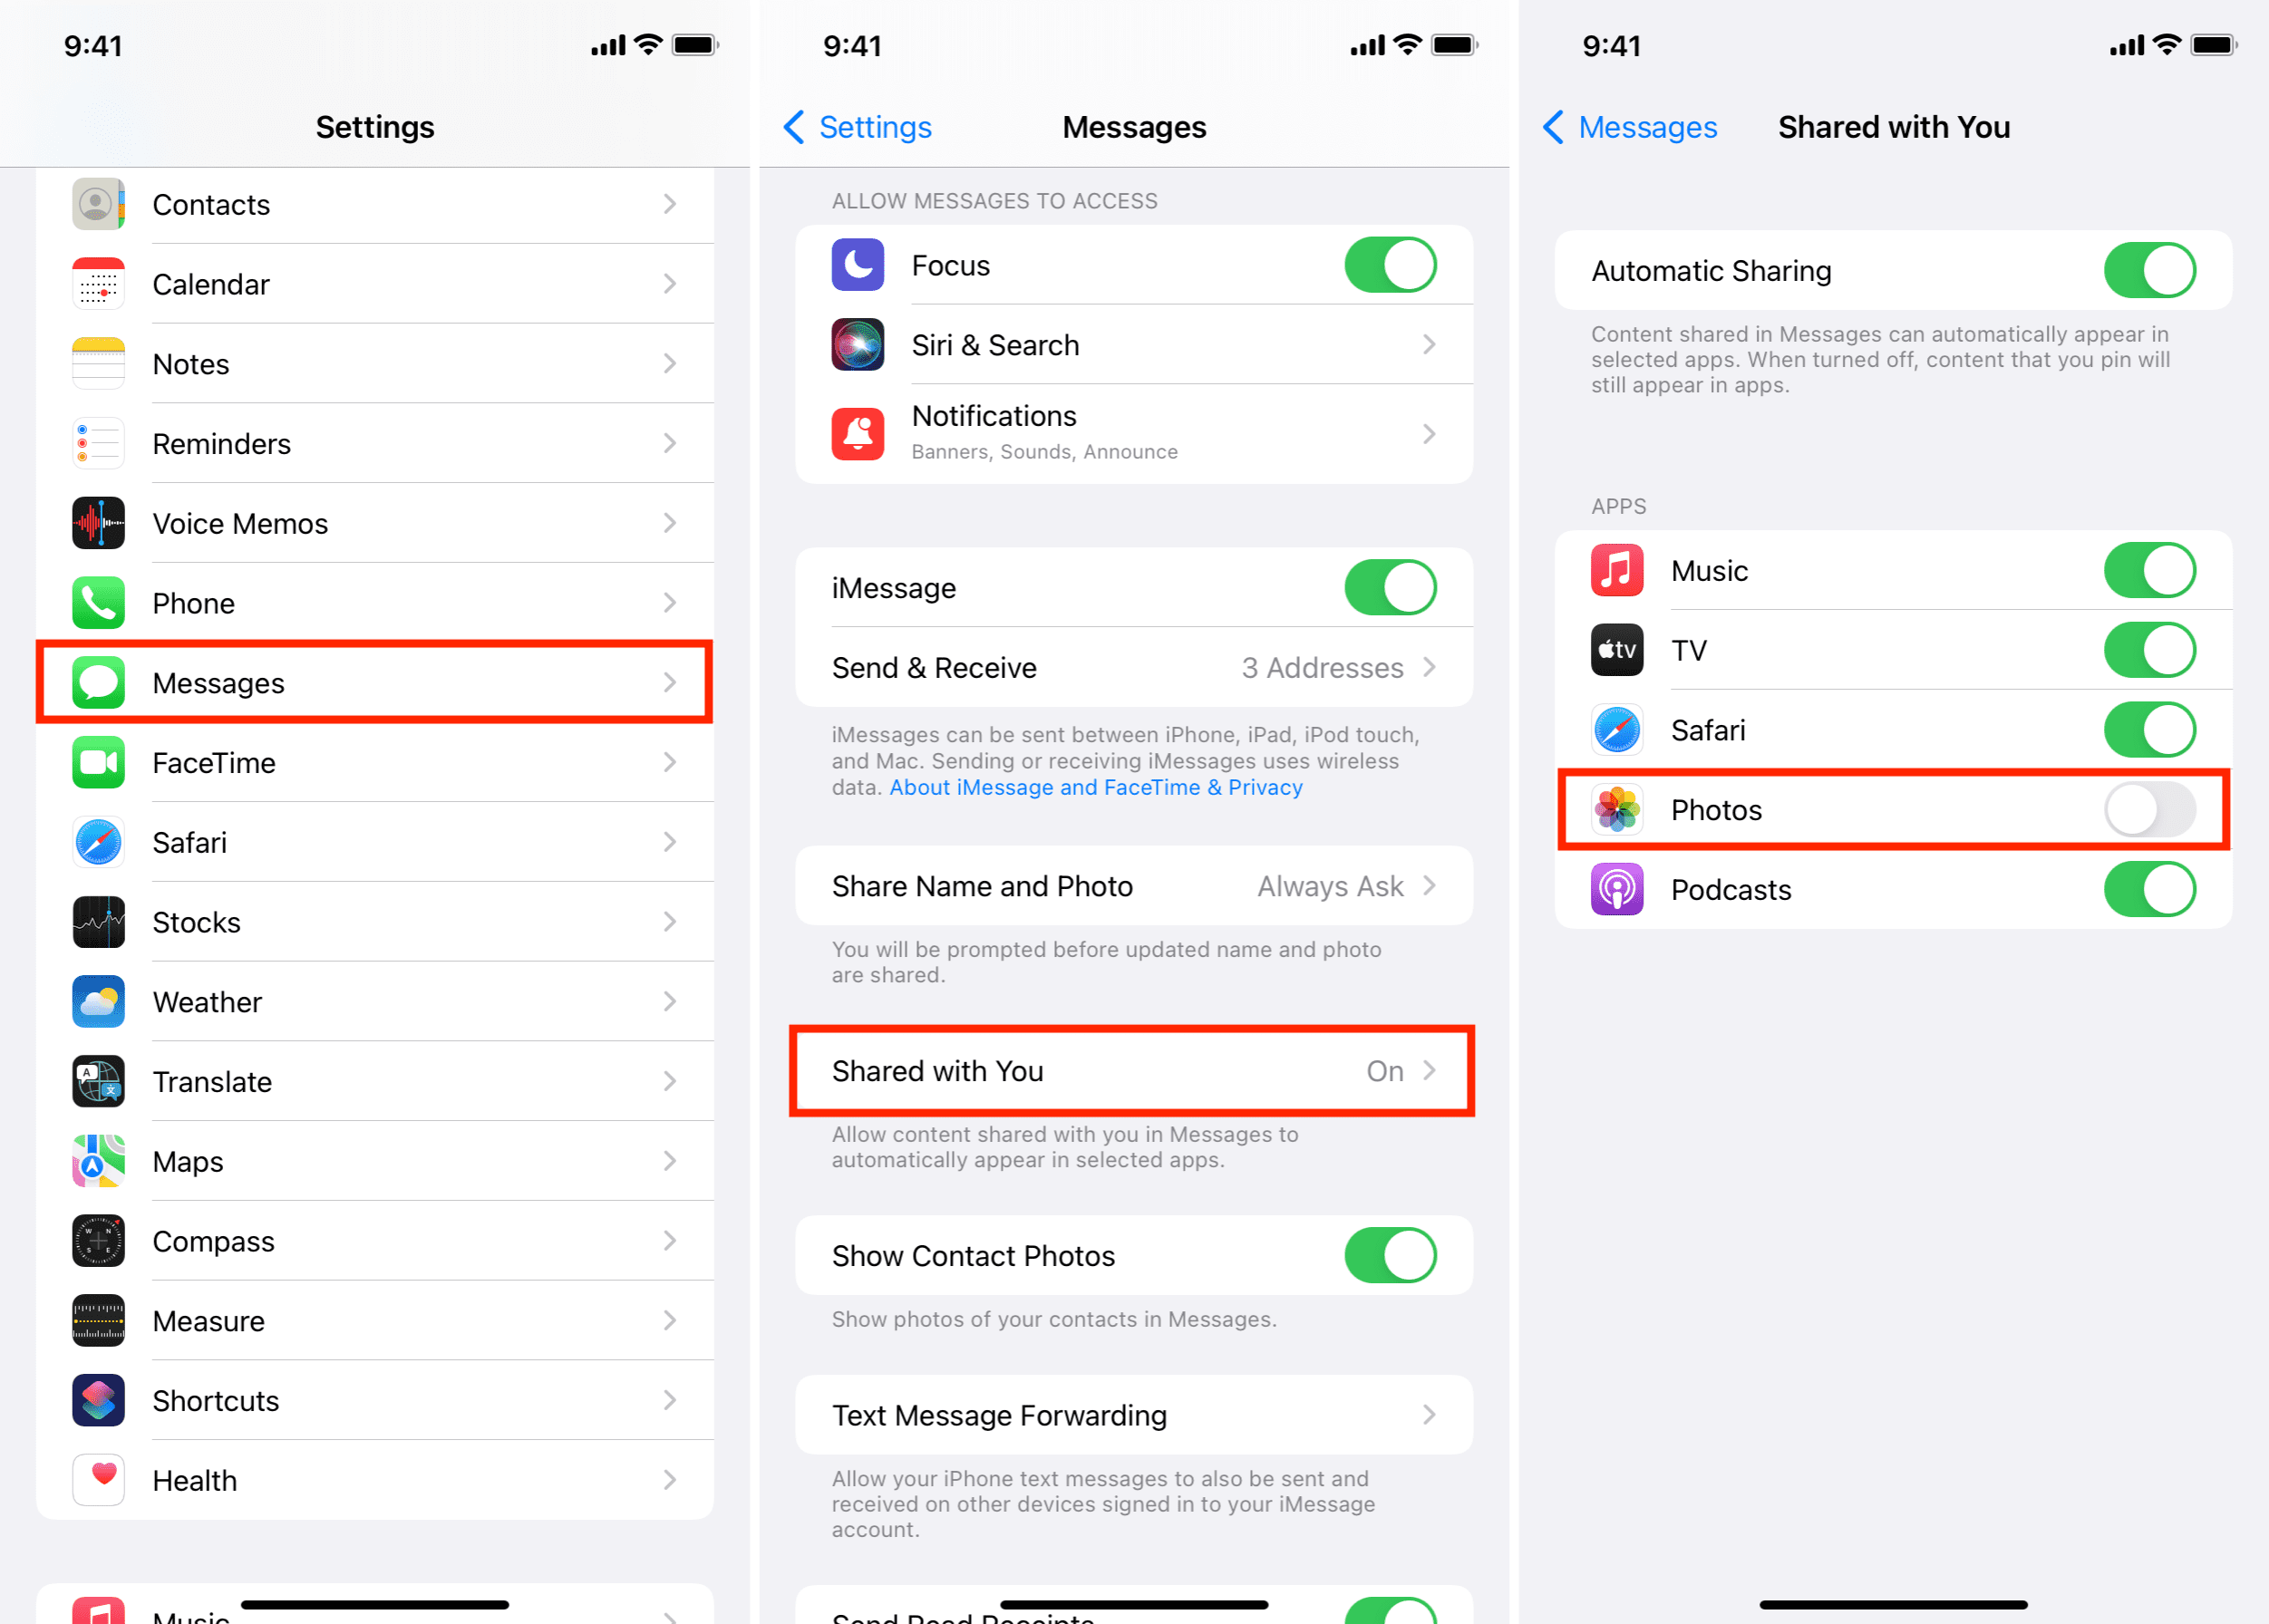 Turn off Shared with You for Photos in iPhone Messages settings